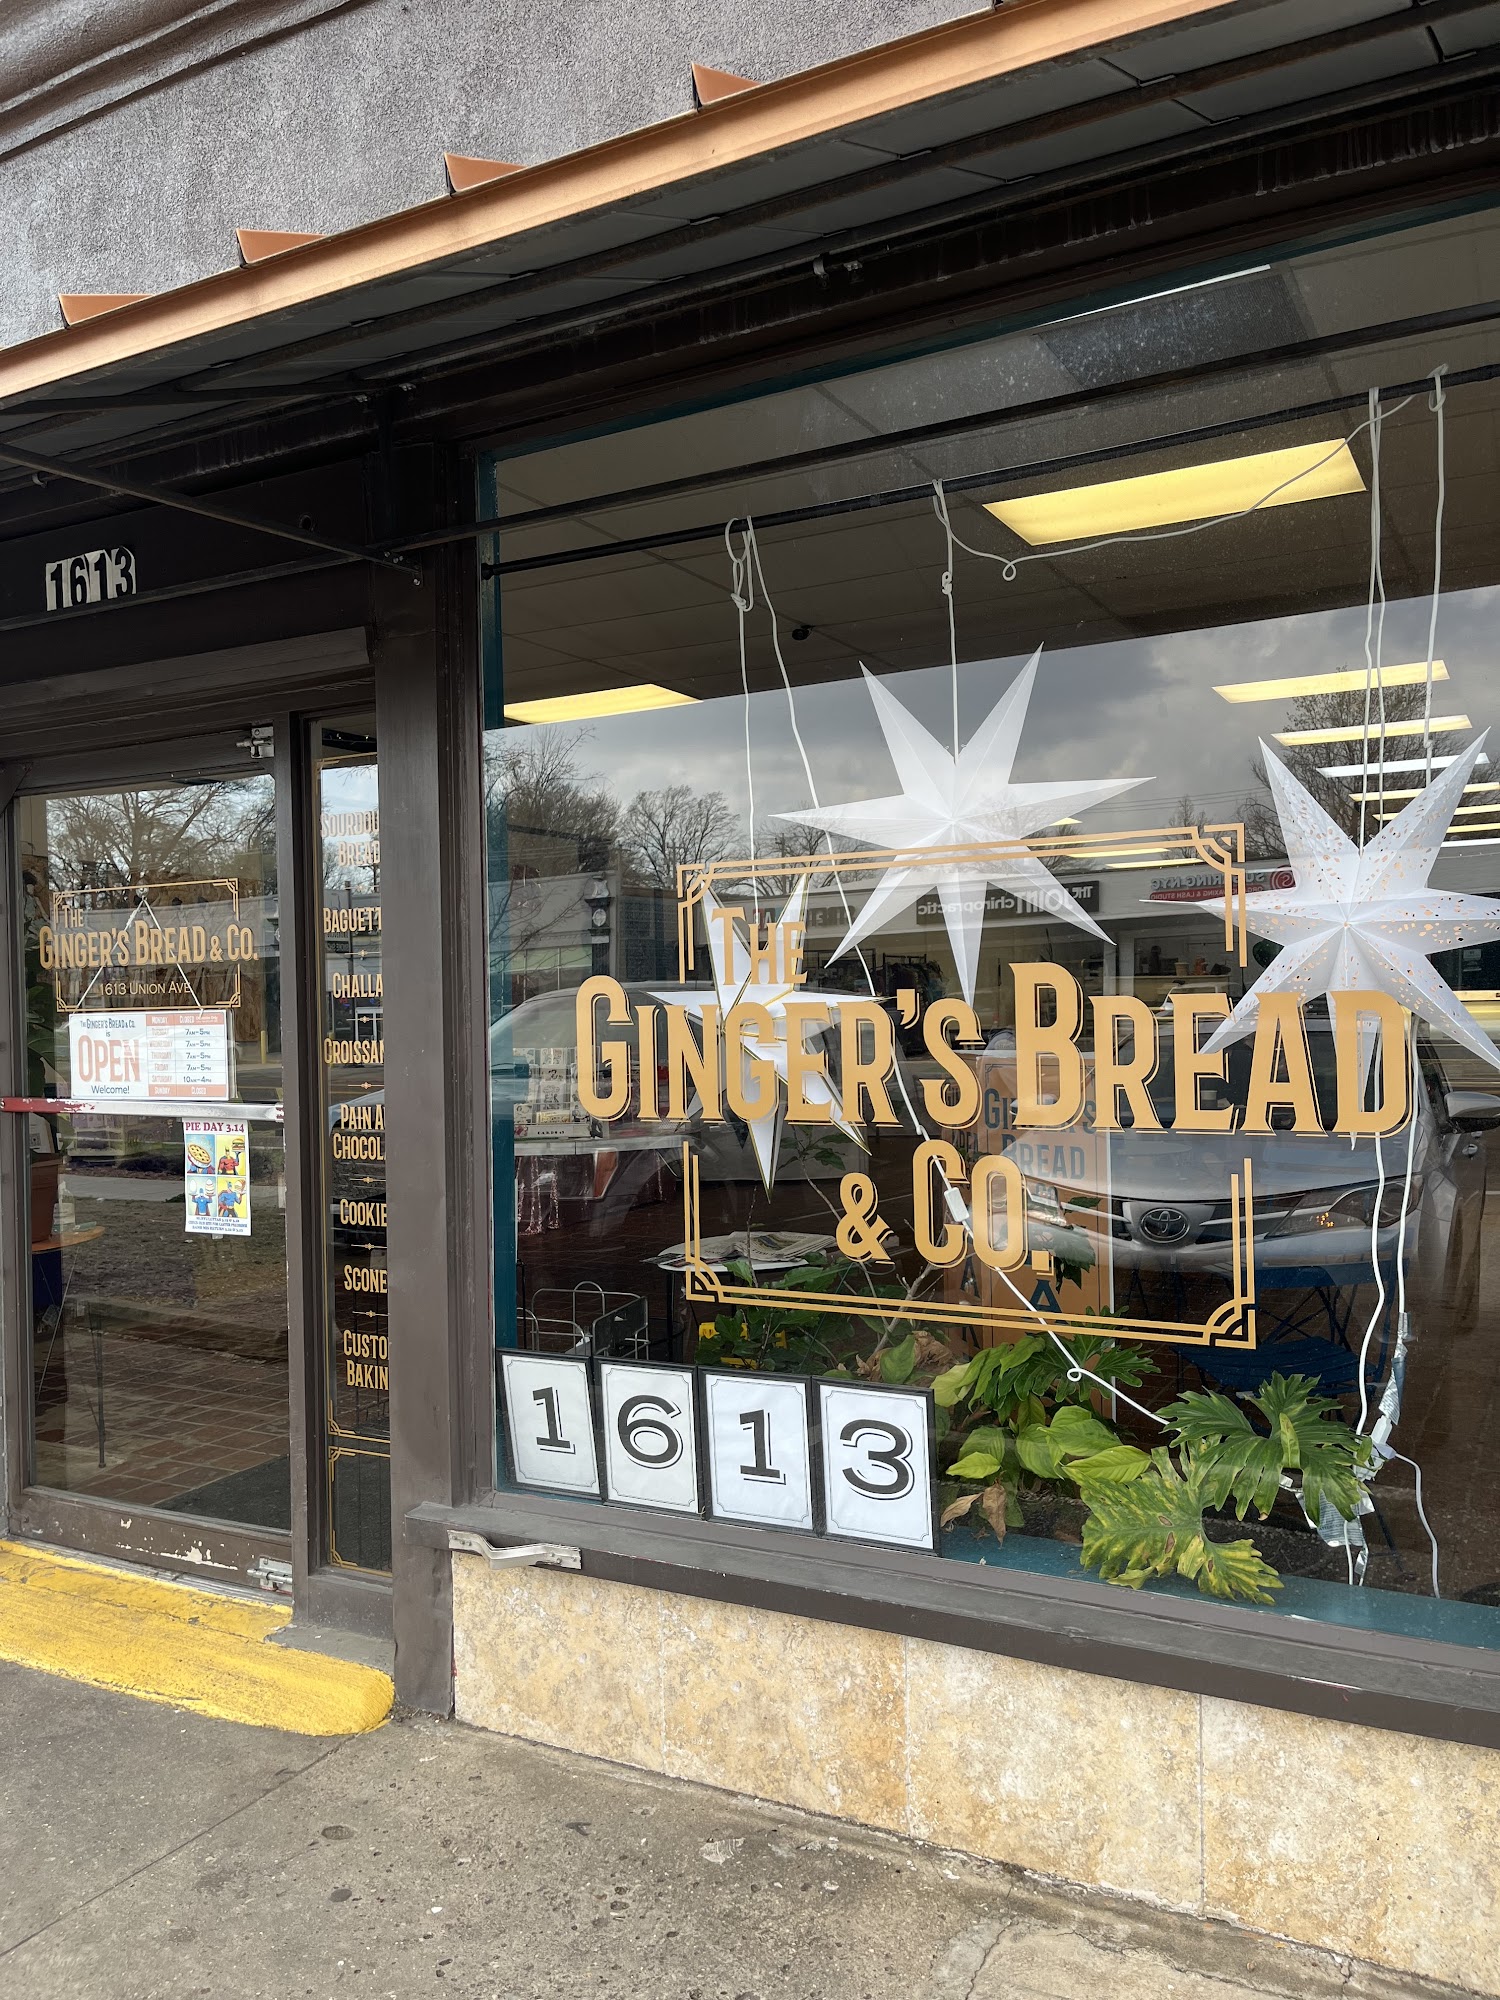 The Ginger’s Bread & Co.